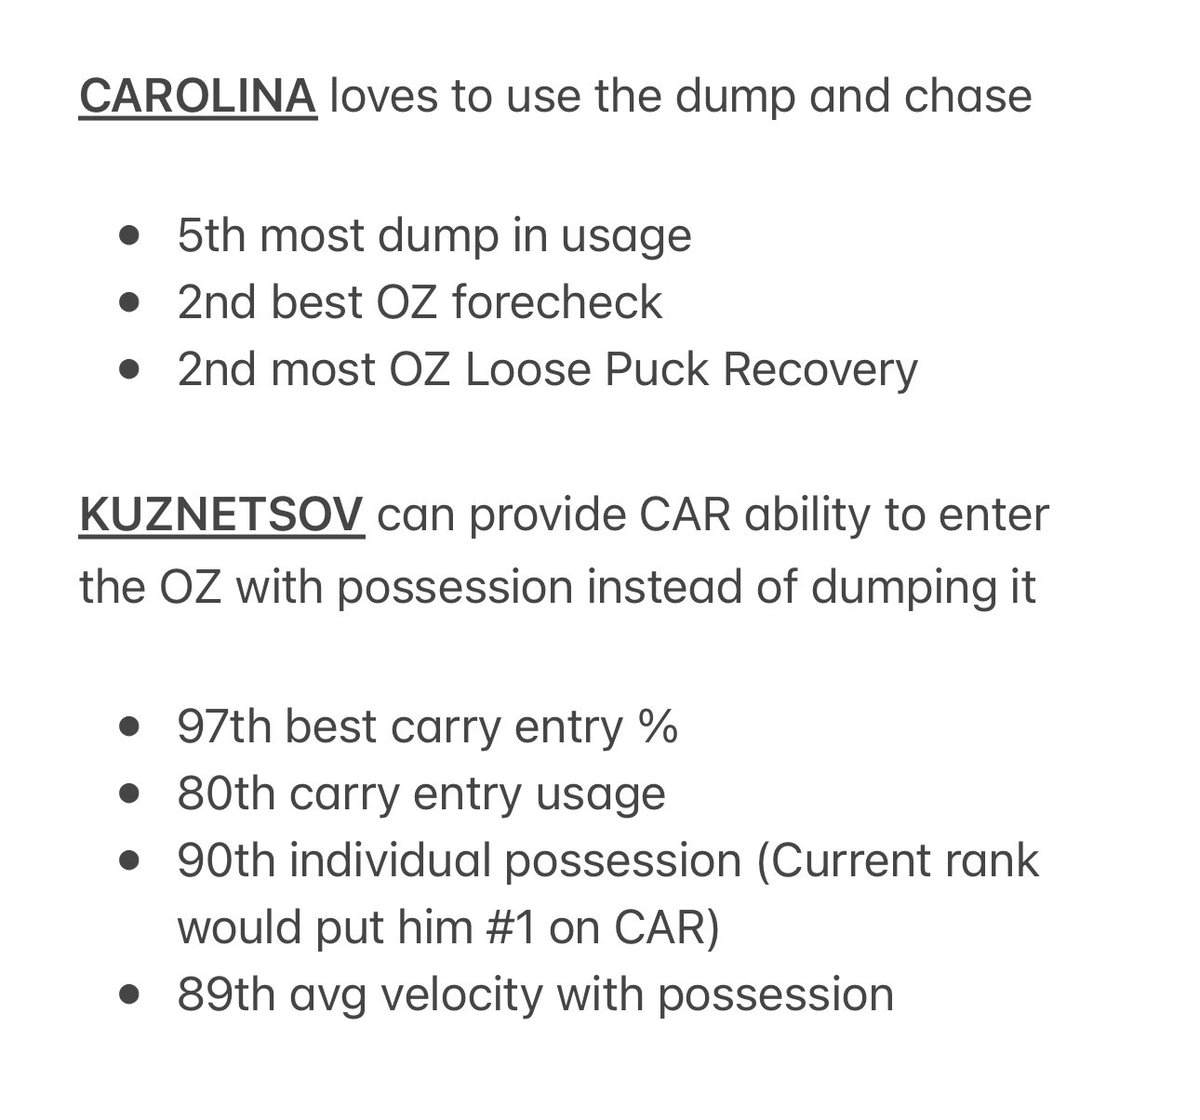 Interesting acquisition for @Canes of Kuznetsov. Like Guentzel, it’s a departure from the usual player archetype and their norm of ‘the sum of the parts’/systems style that RBA has them play. Both guys introduce a new dynamic to this lineup. All stats are 5v5. @SMTlive